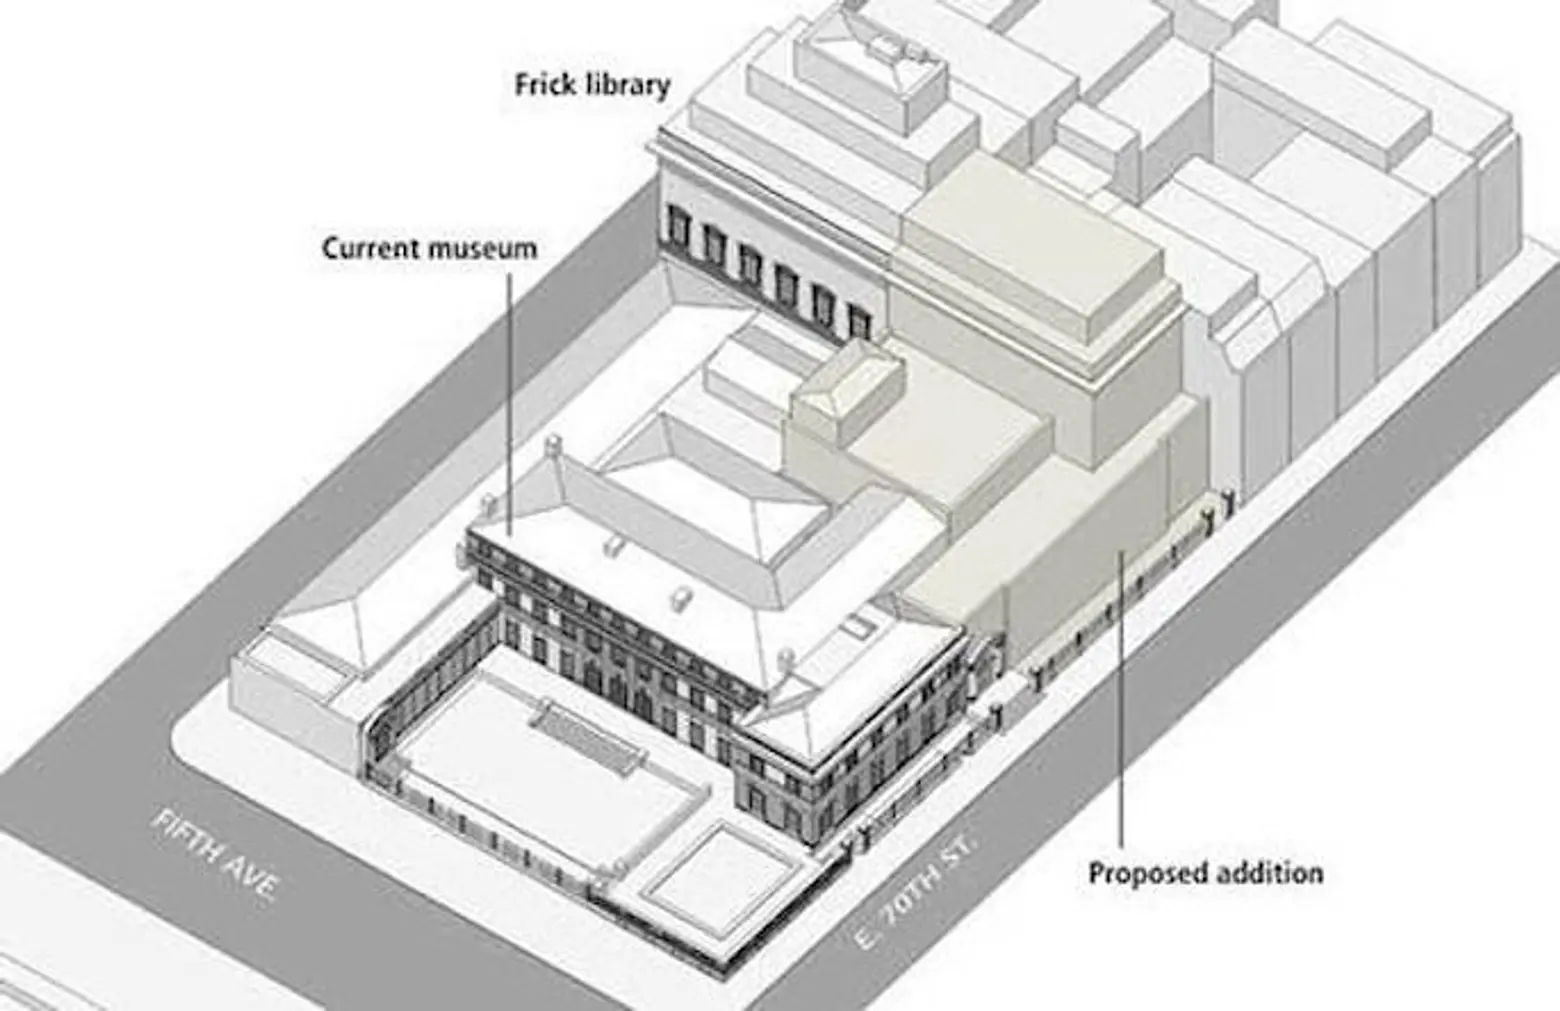 Frick collection rendering